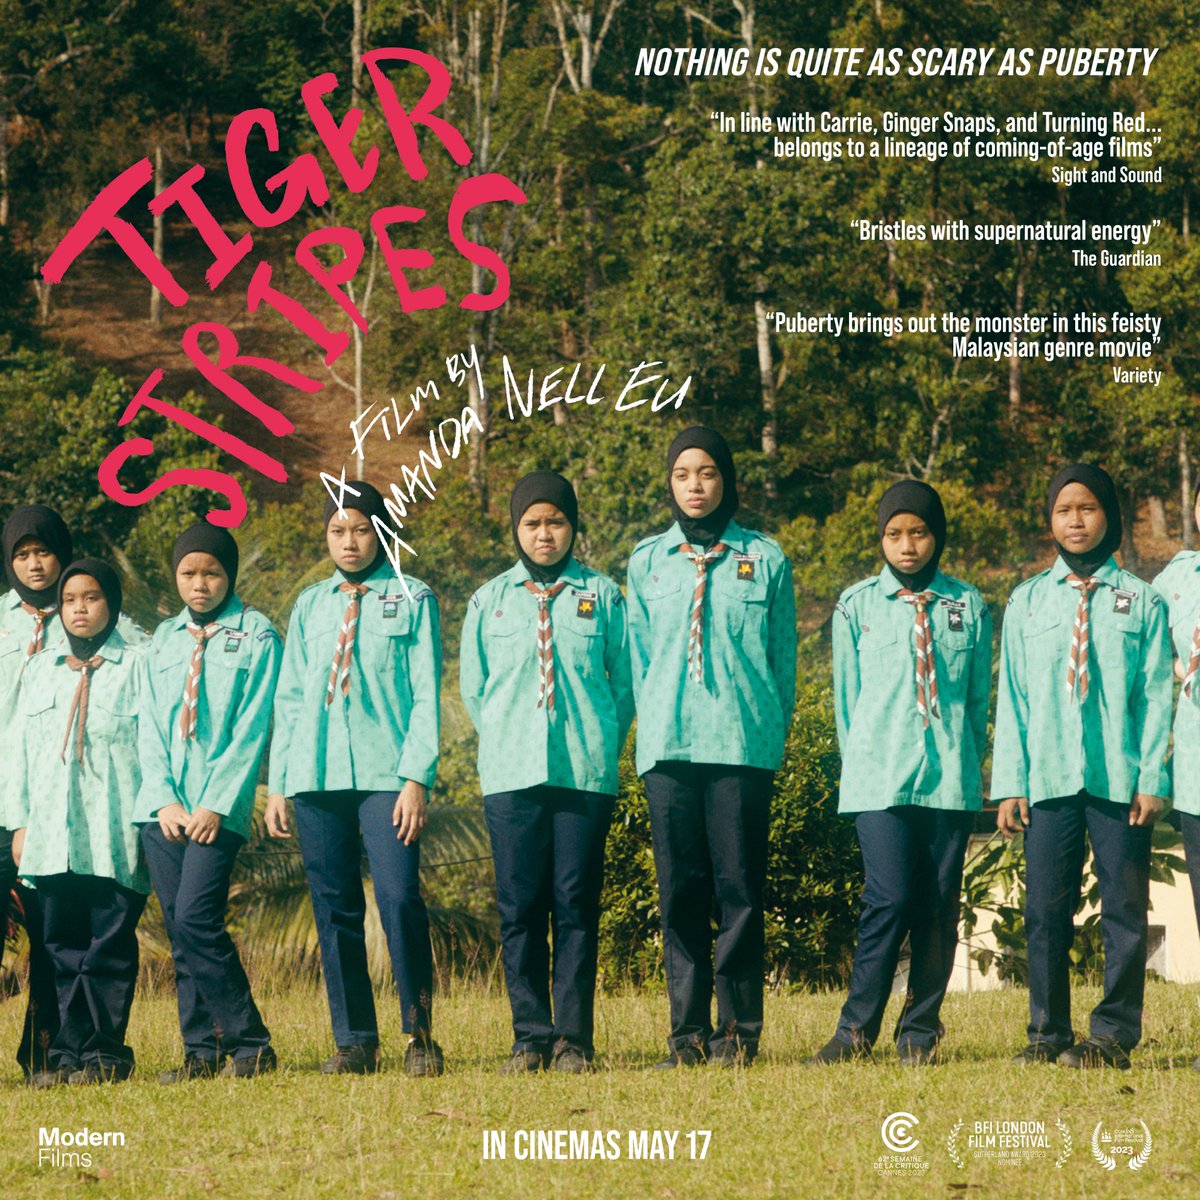 “A well-observed, fiercely female-centred coming-of-age drama” Screen Daily Amanda Nell Eu's Cannes award-winning film is in cinemas this Friday, with previews at @picturehouses nationwide today. Book tickets now: modernfilms.com/tigerstripes